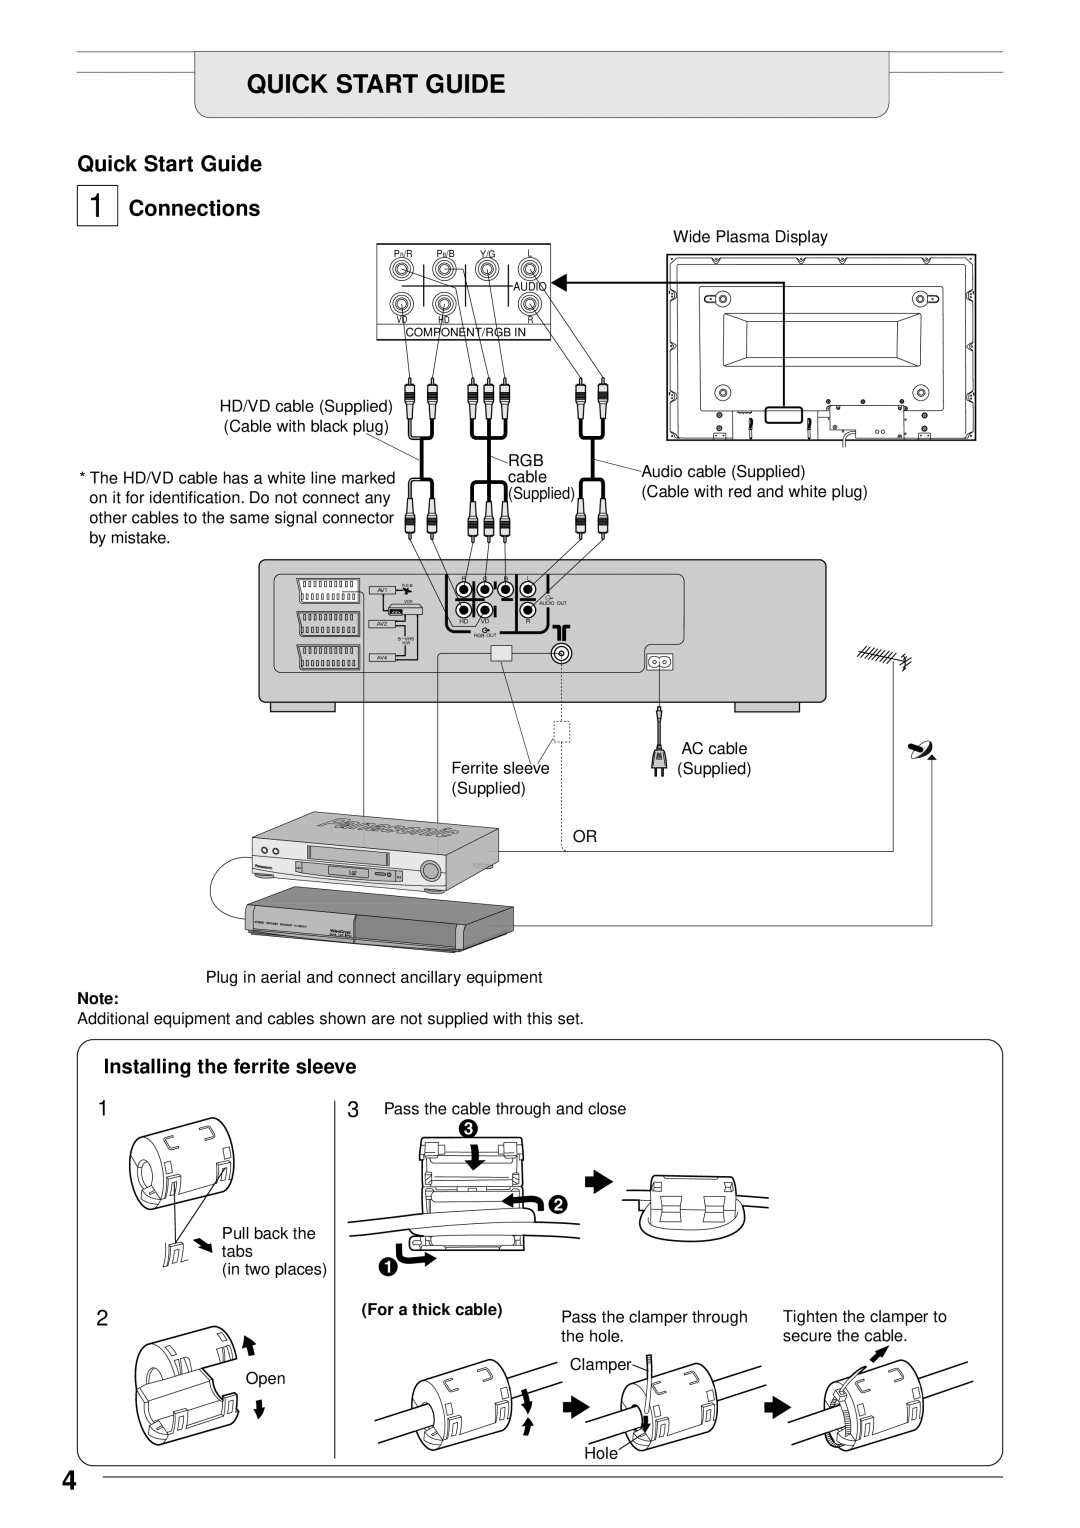 Panasonic TU-PTA100E manual Quick Start Guide, Connections, Installing the ferrite sleeve, For a thick cable 